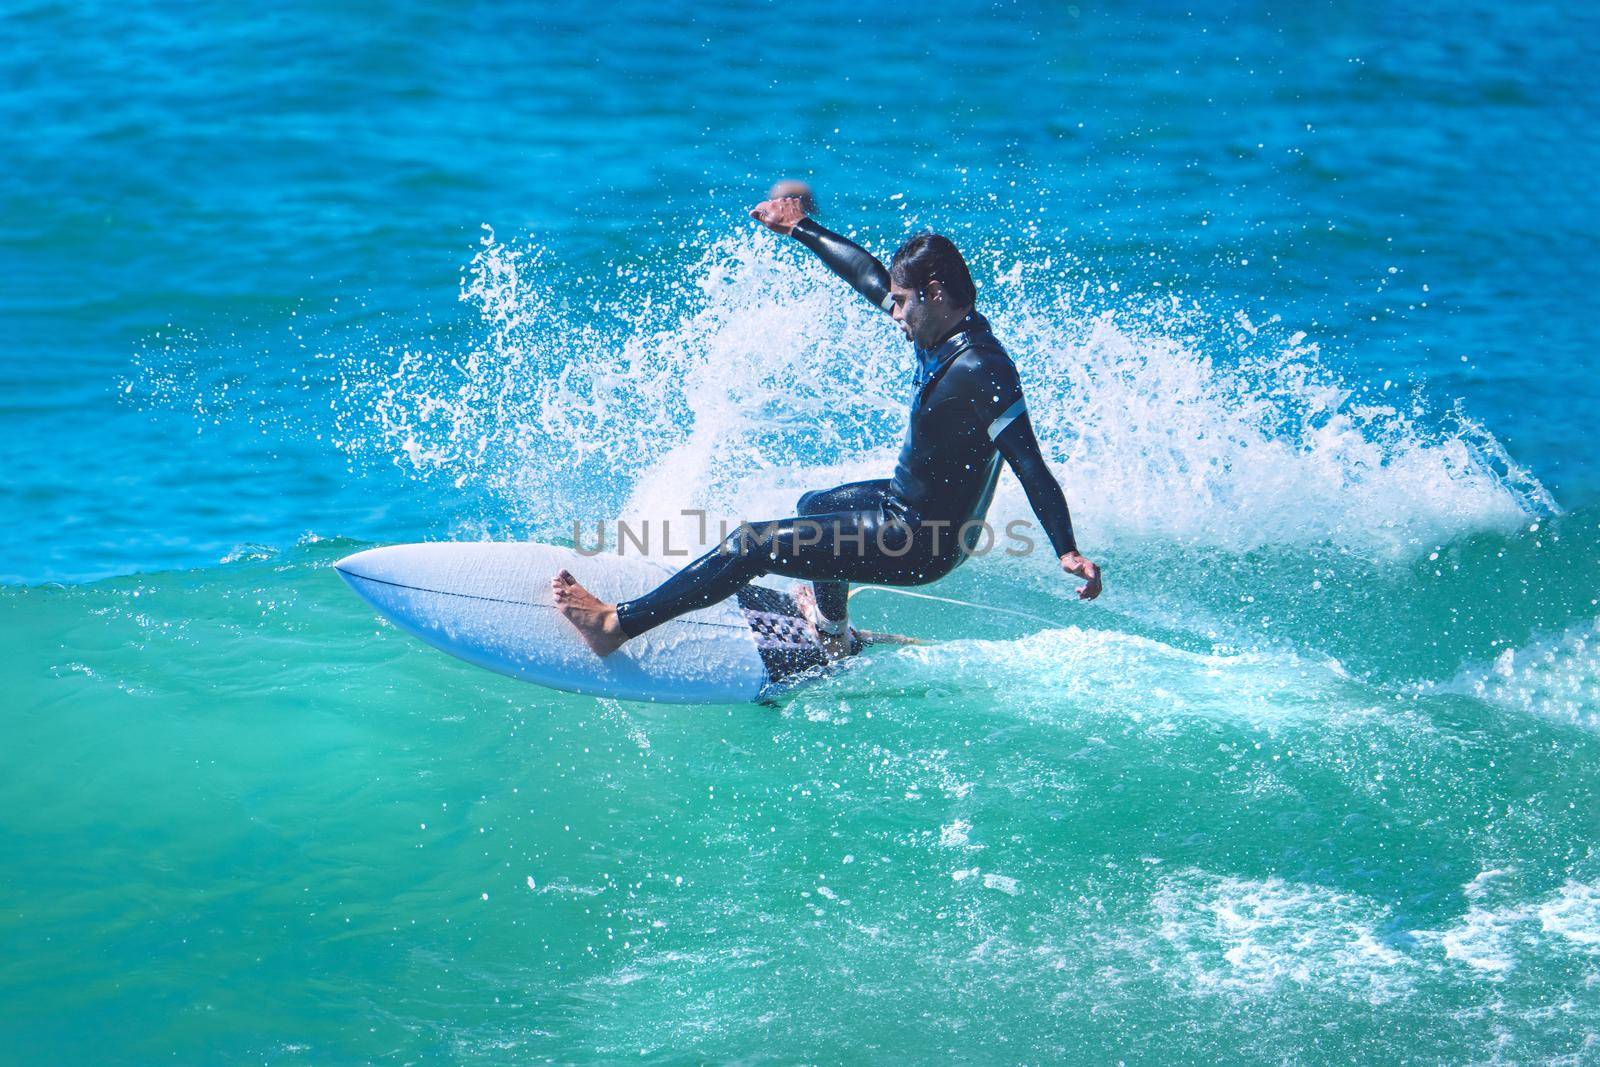 Surfer riding the wave on shortboard. Man catching waves in ocean. Water sports activity. High quality photo